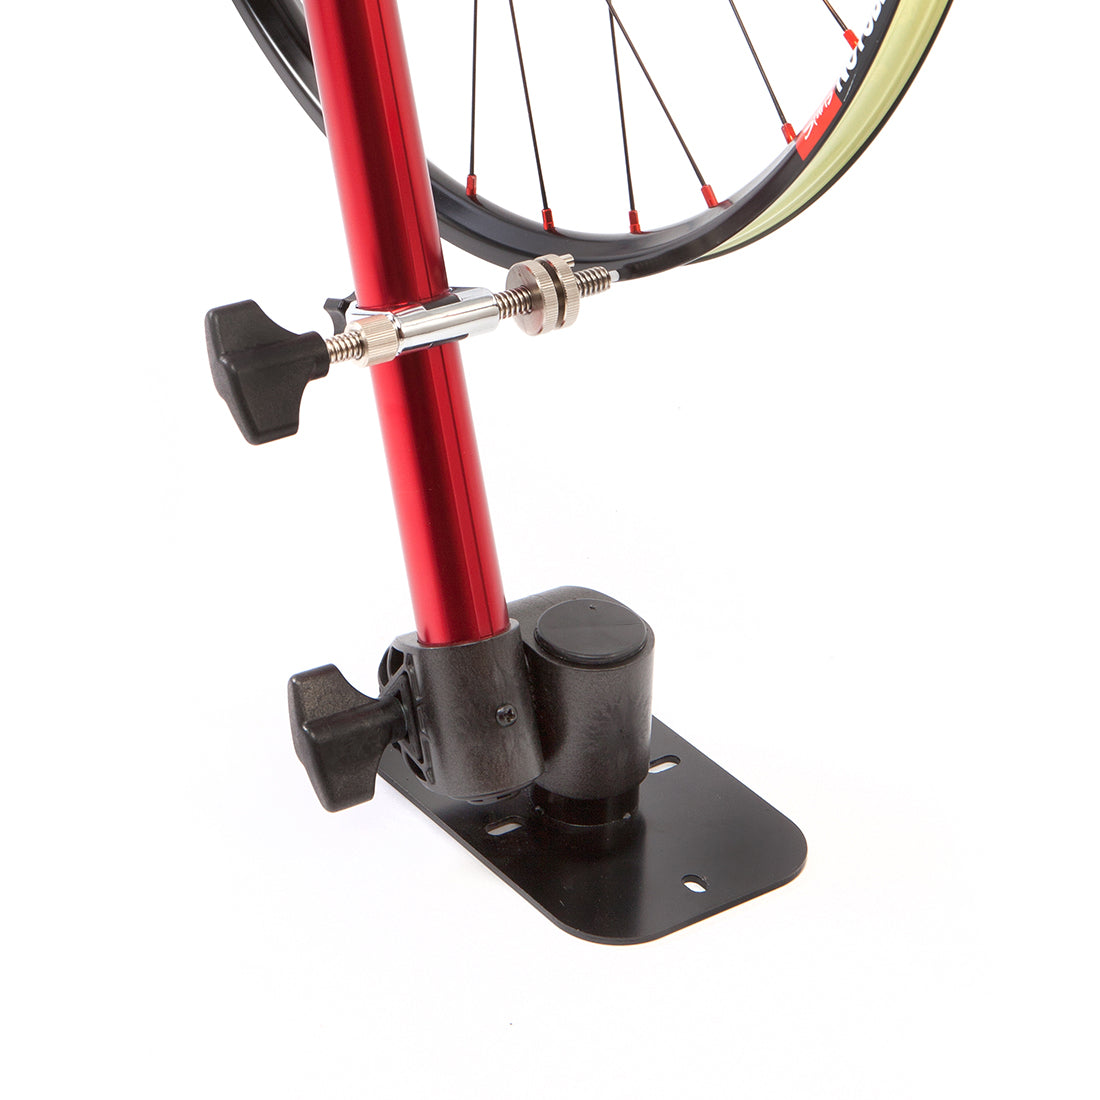 Bike wheel truing stand with bench mount.